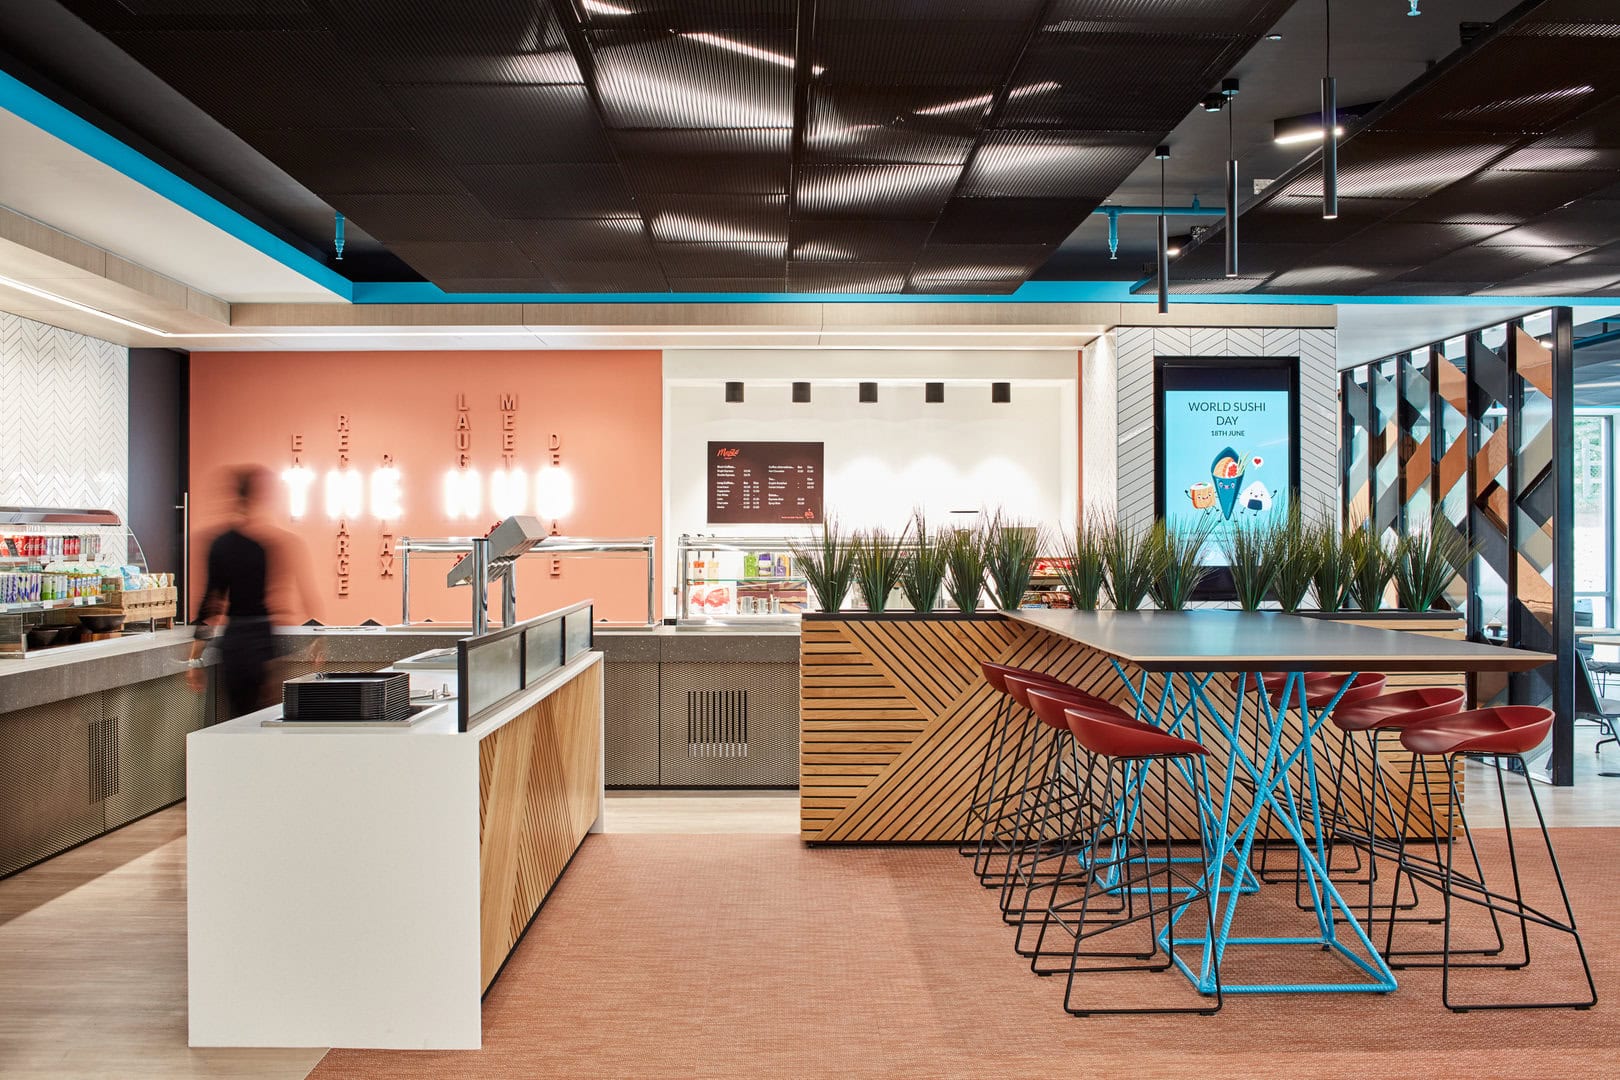 An office canteen exemplifies workplace wellbeing facilities.